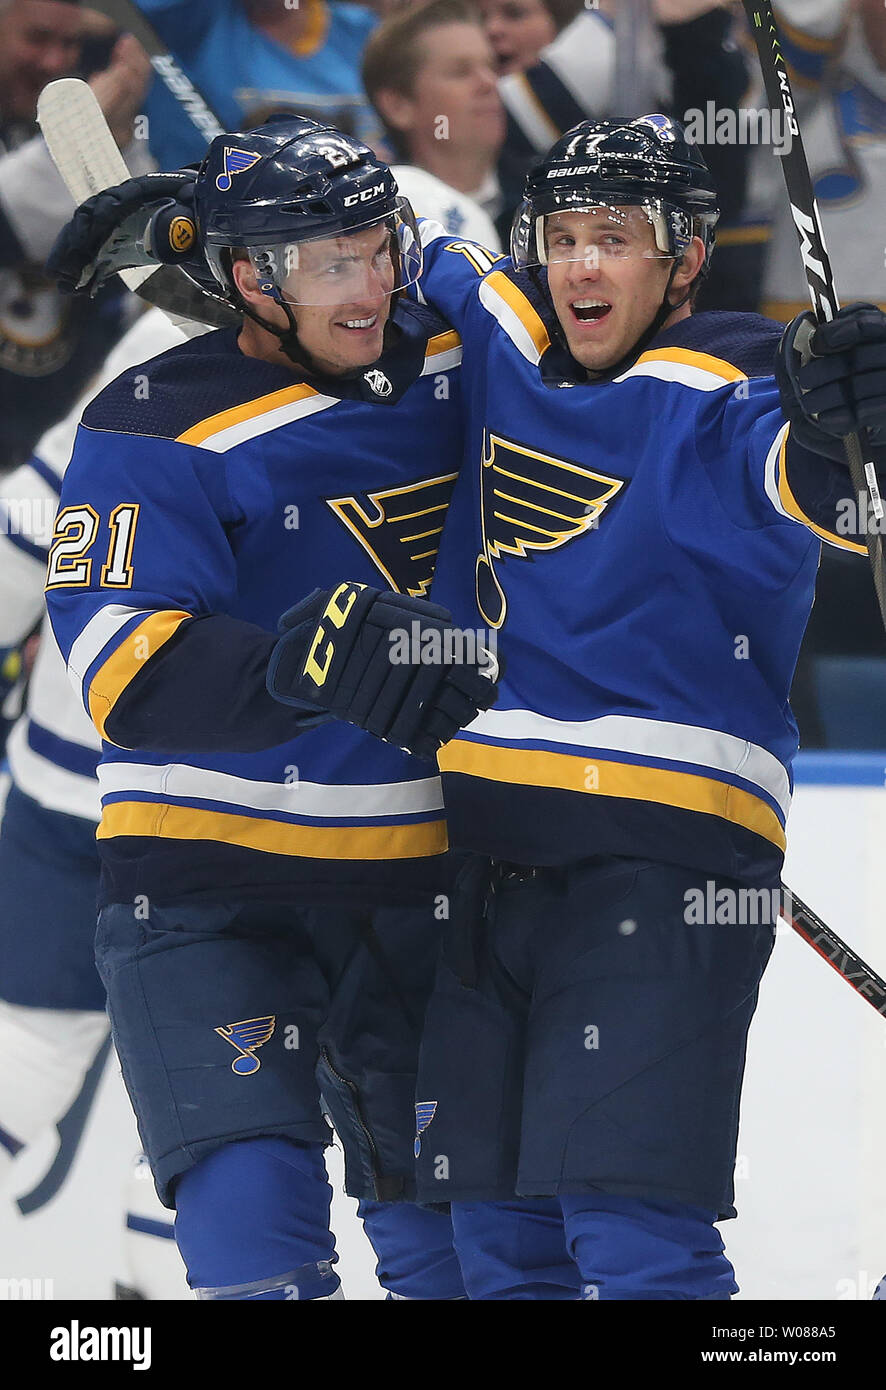 FILE - In this Feb. 2, 2017, file photo, St. Louis Blues' Colton Parayko  celebrates after scoring during the second period of the team's NHL hockey  game against the Toronto Maple Leafs